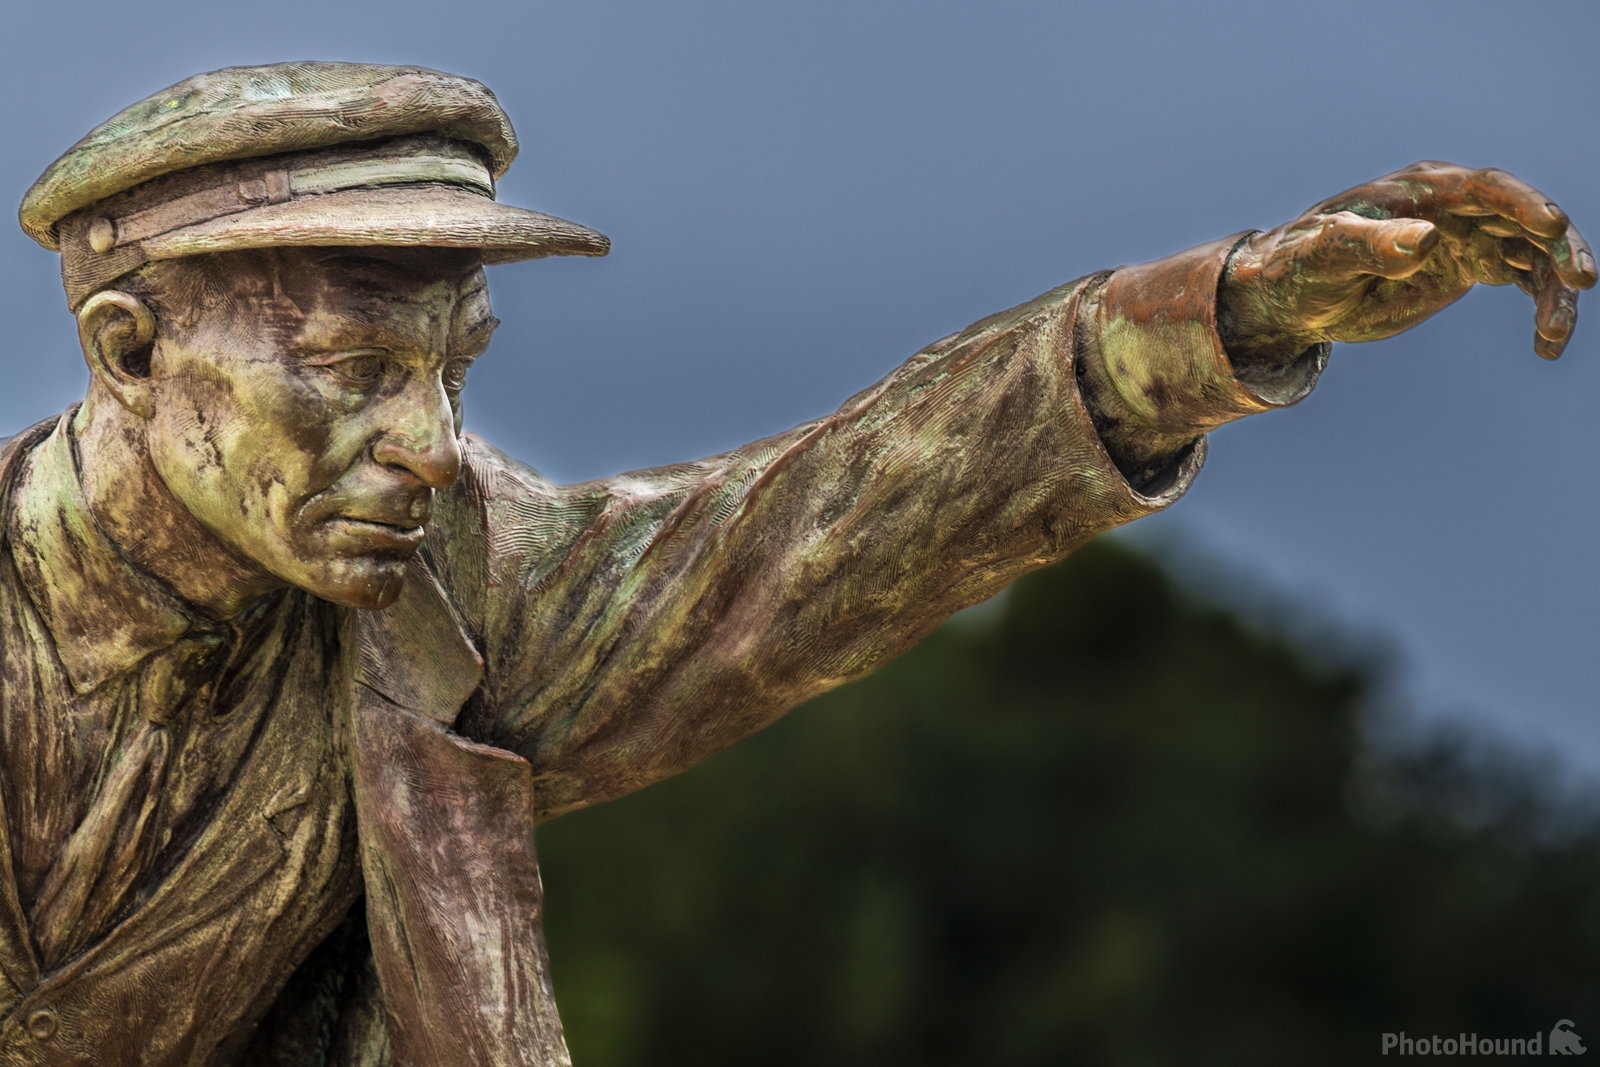 Image of Wright Brothers National Memorial by Wayne Foote